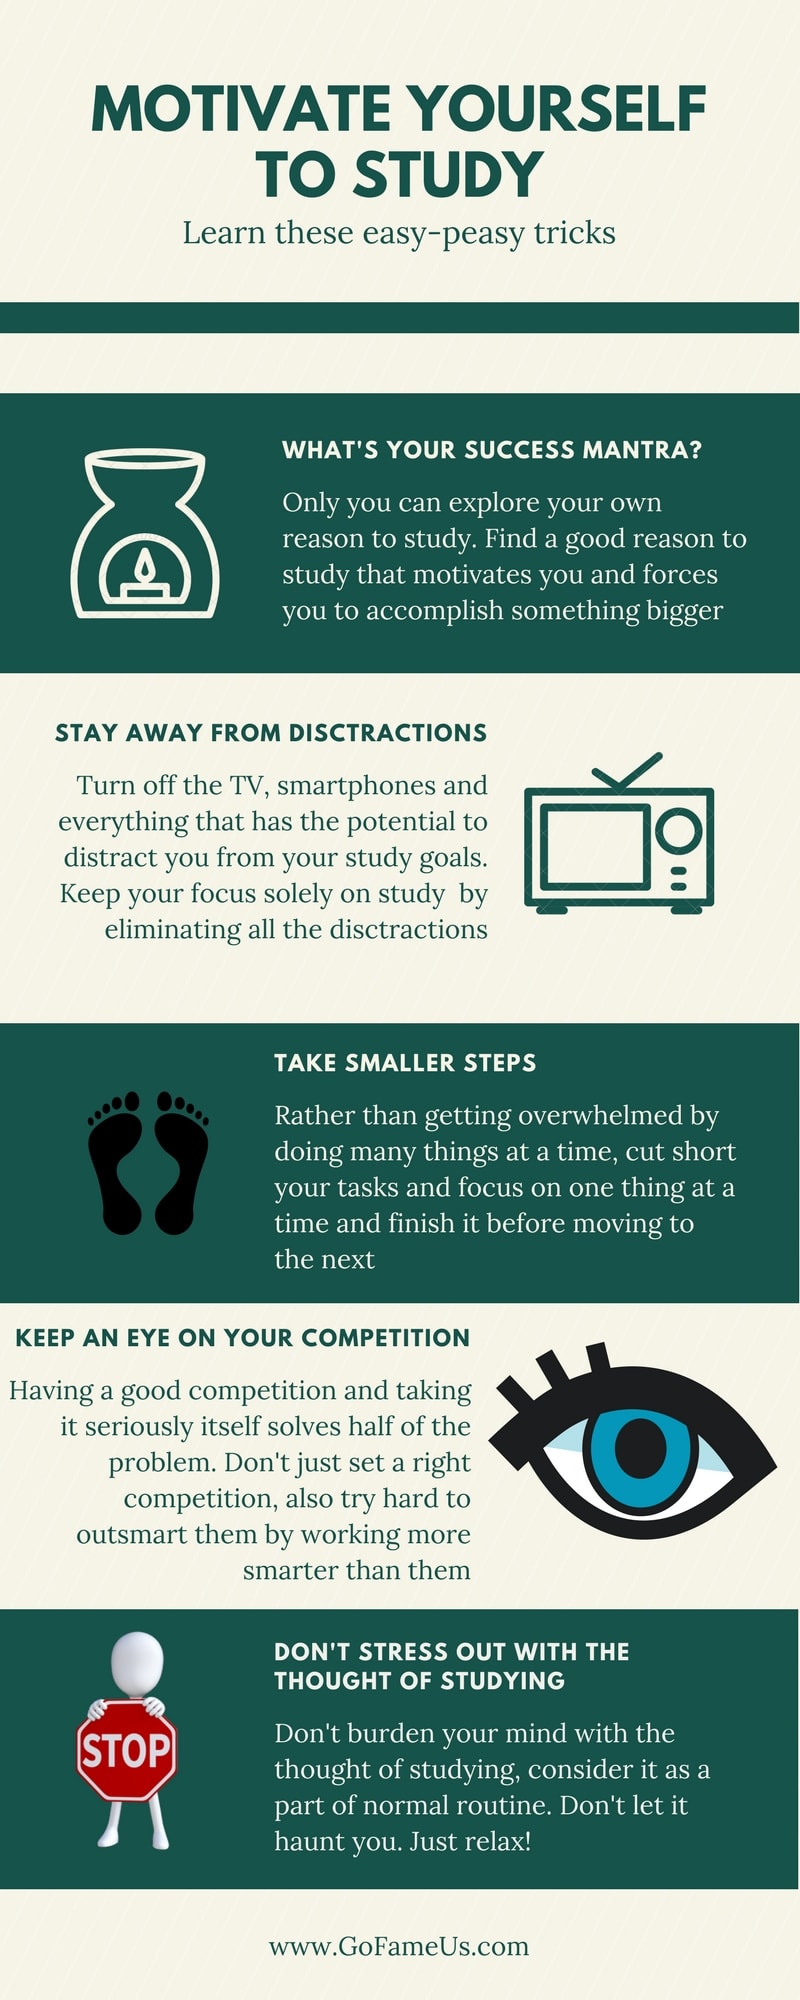 how to motivate yourself to study